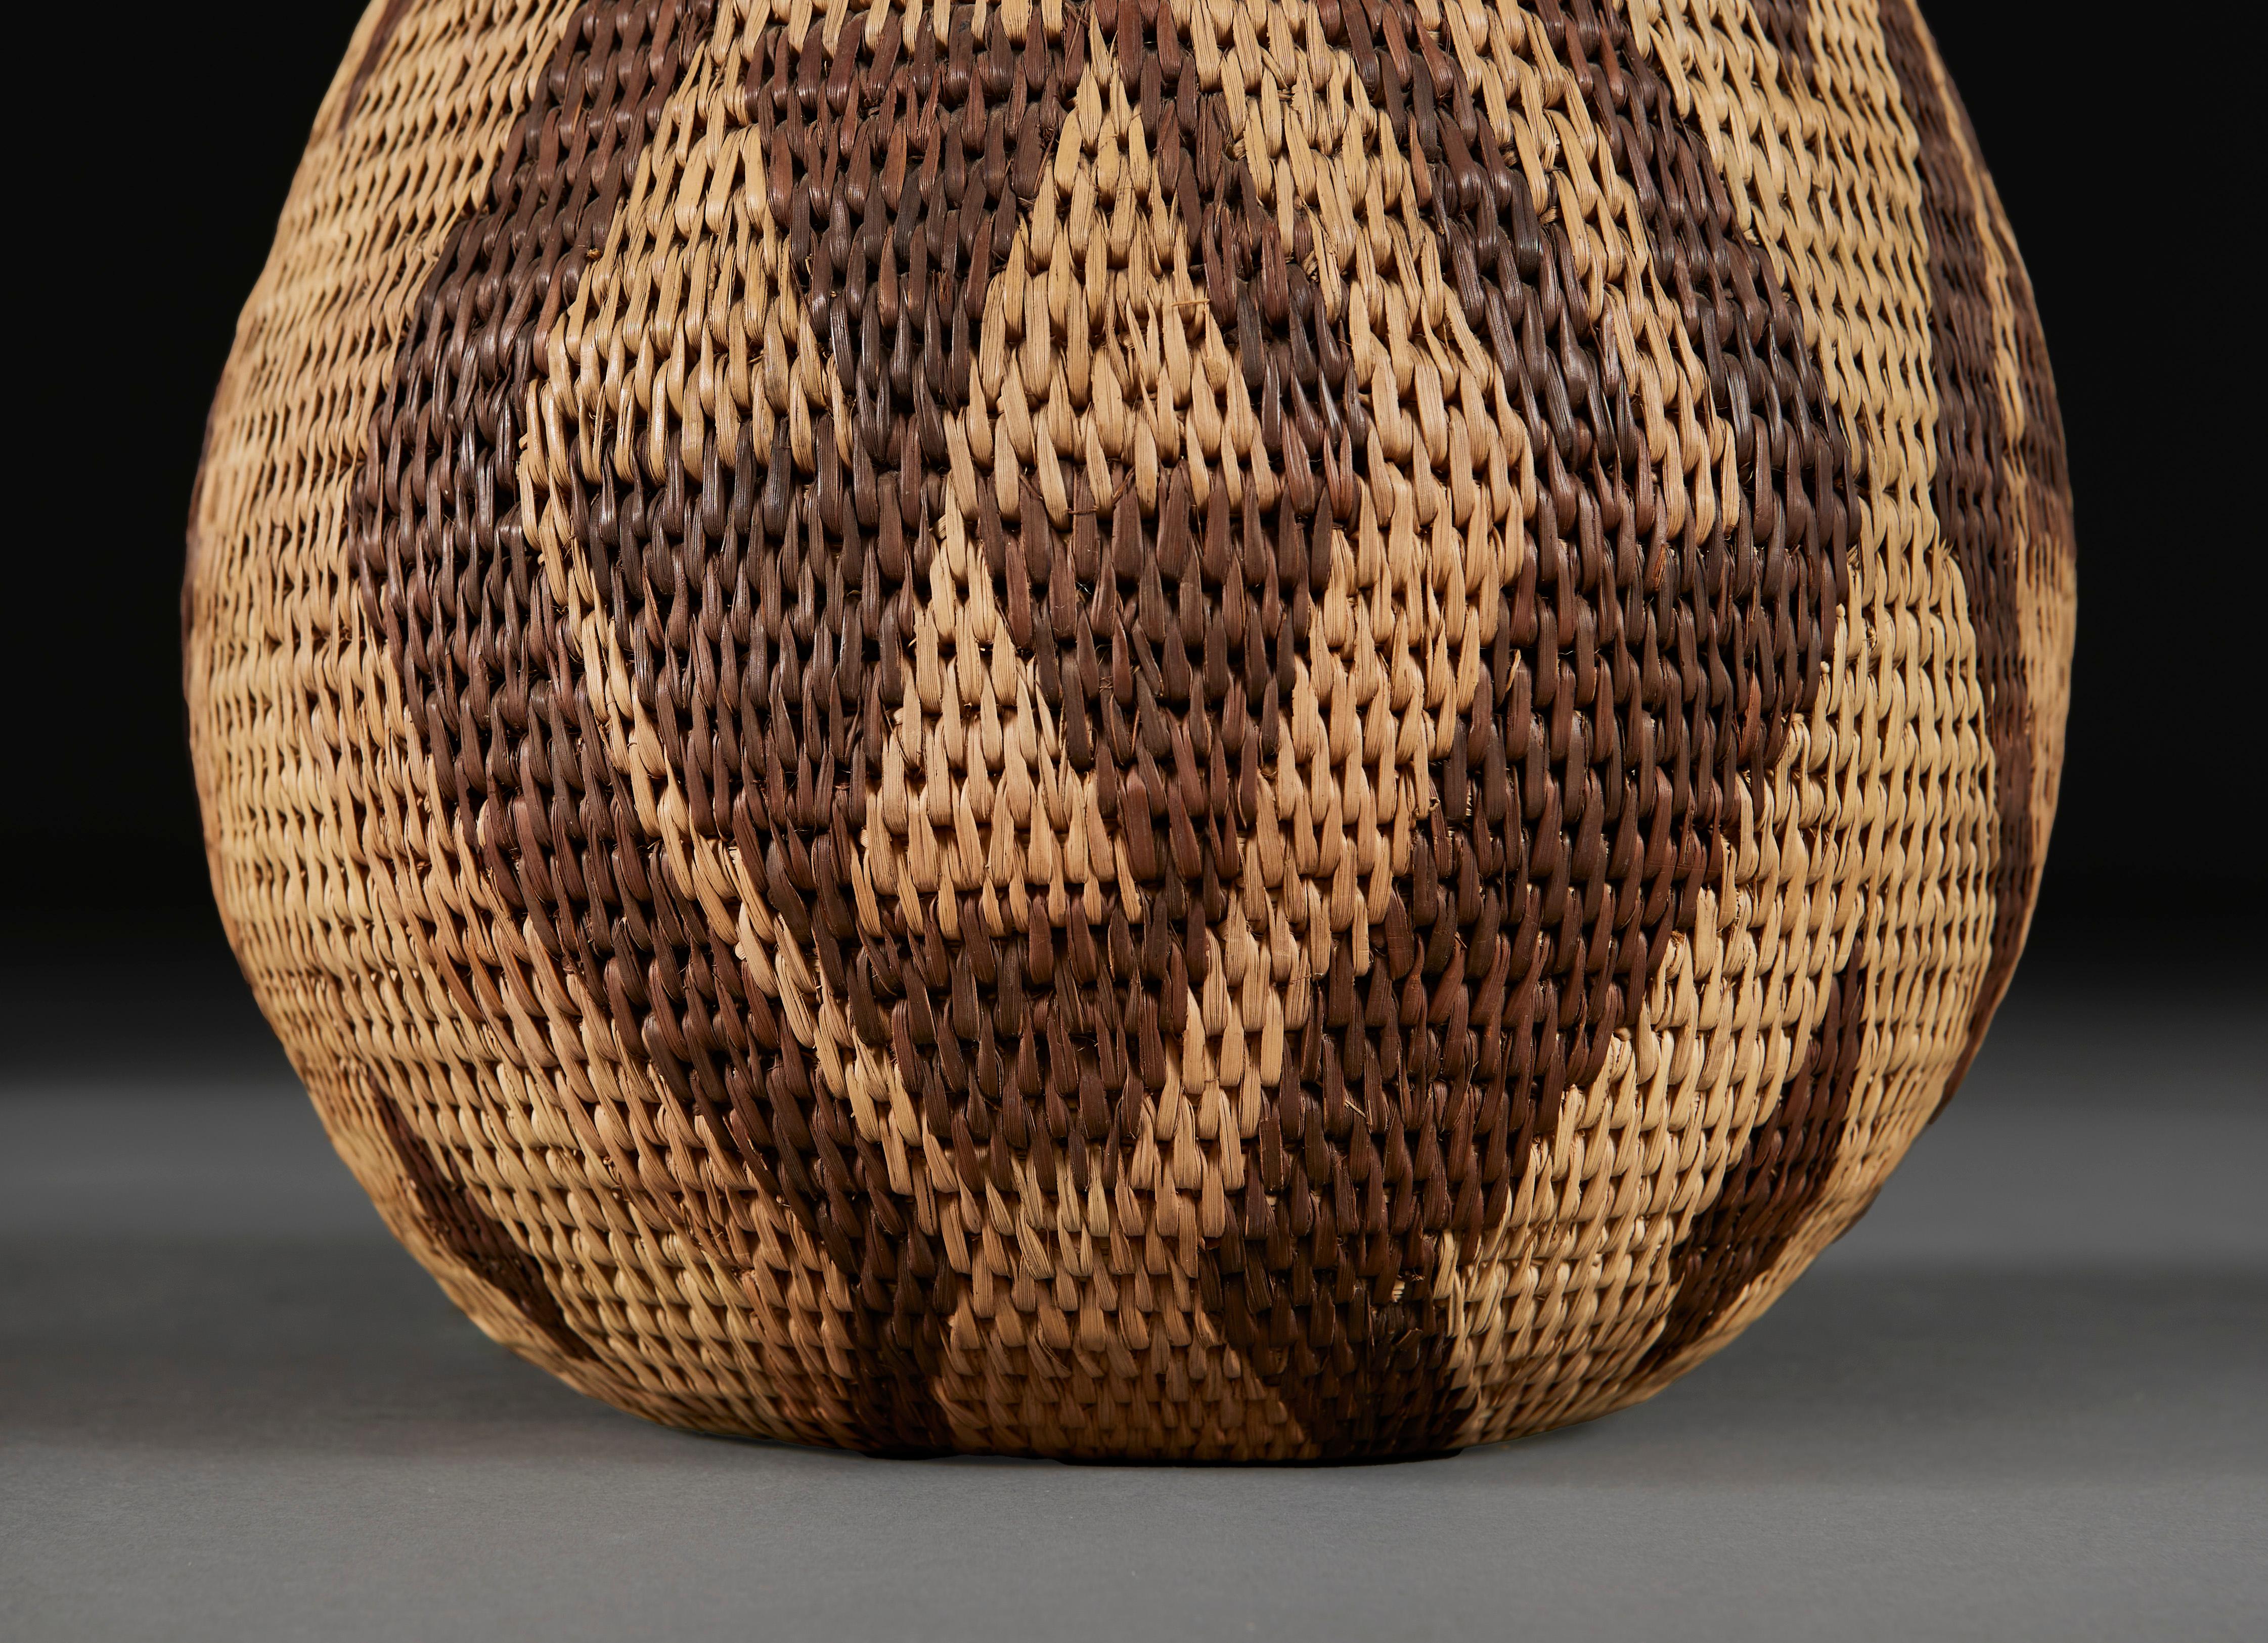 South African A Zulu Basket Weave Lamp For Sale